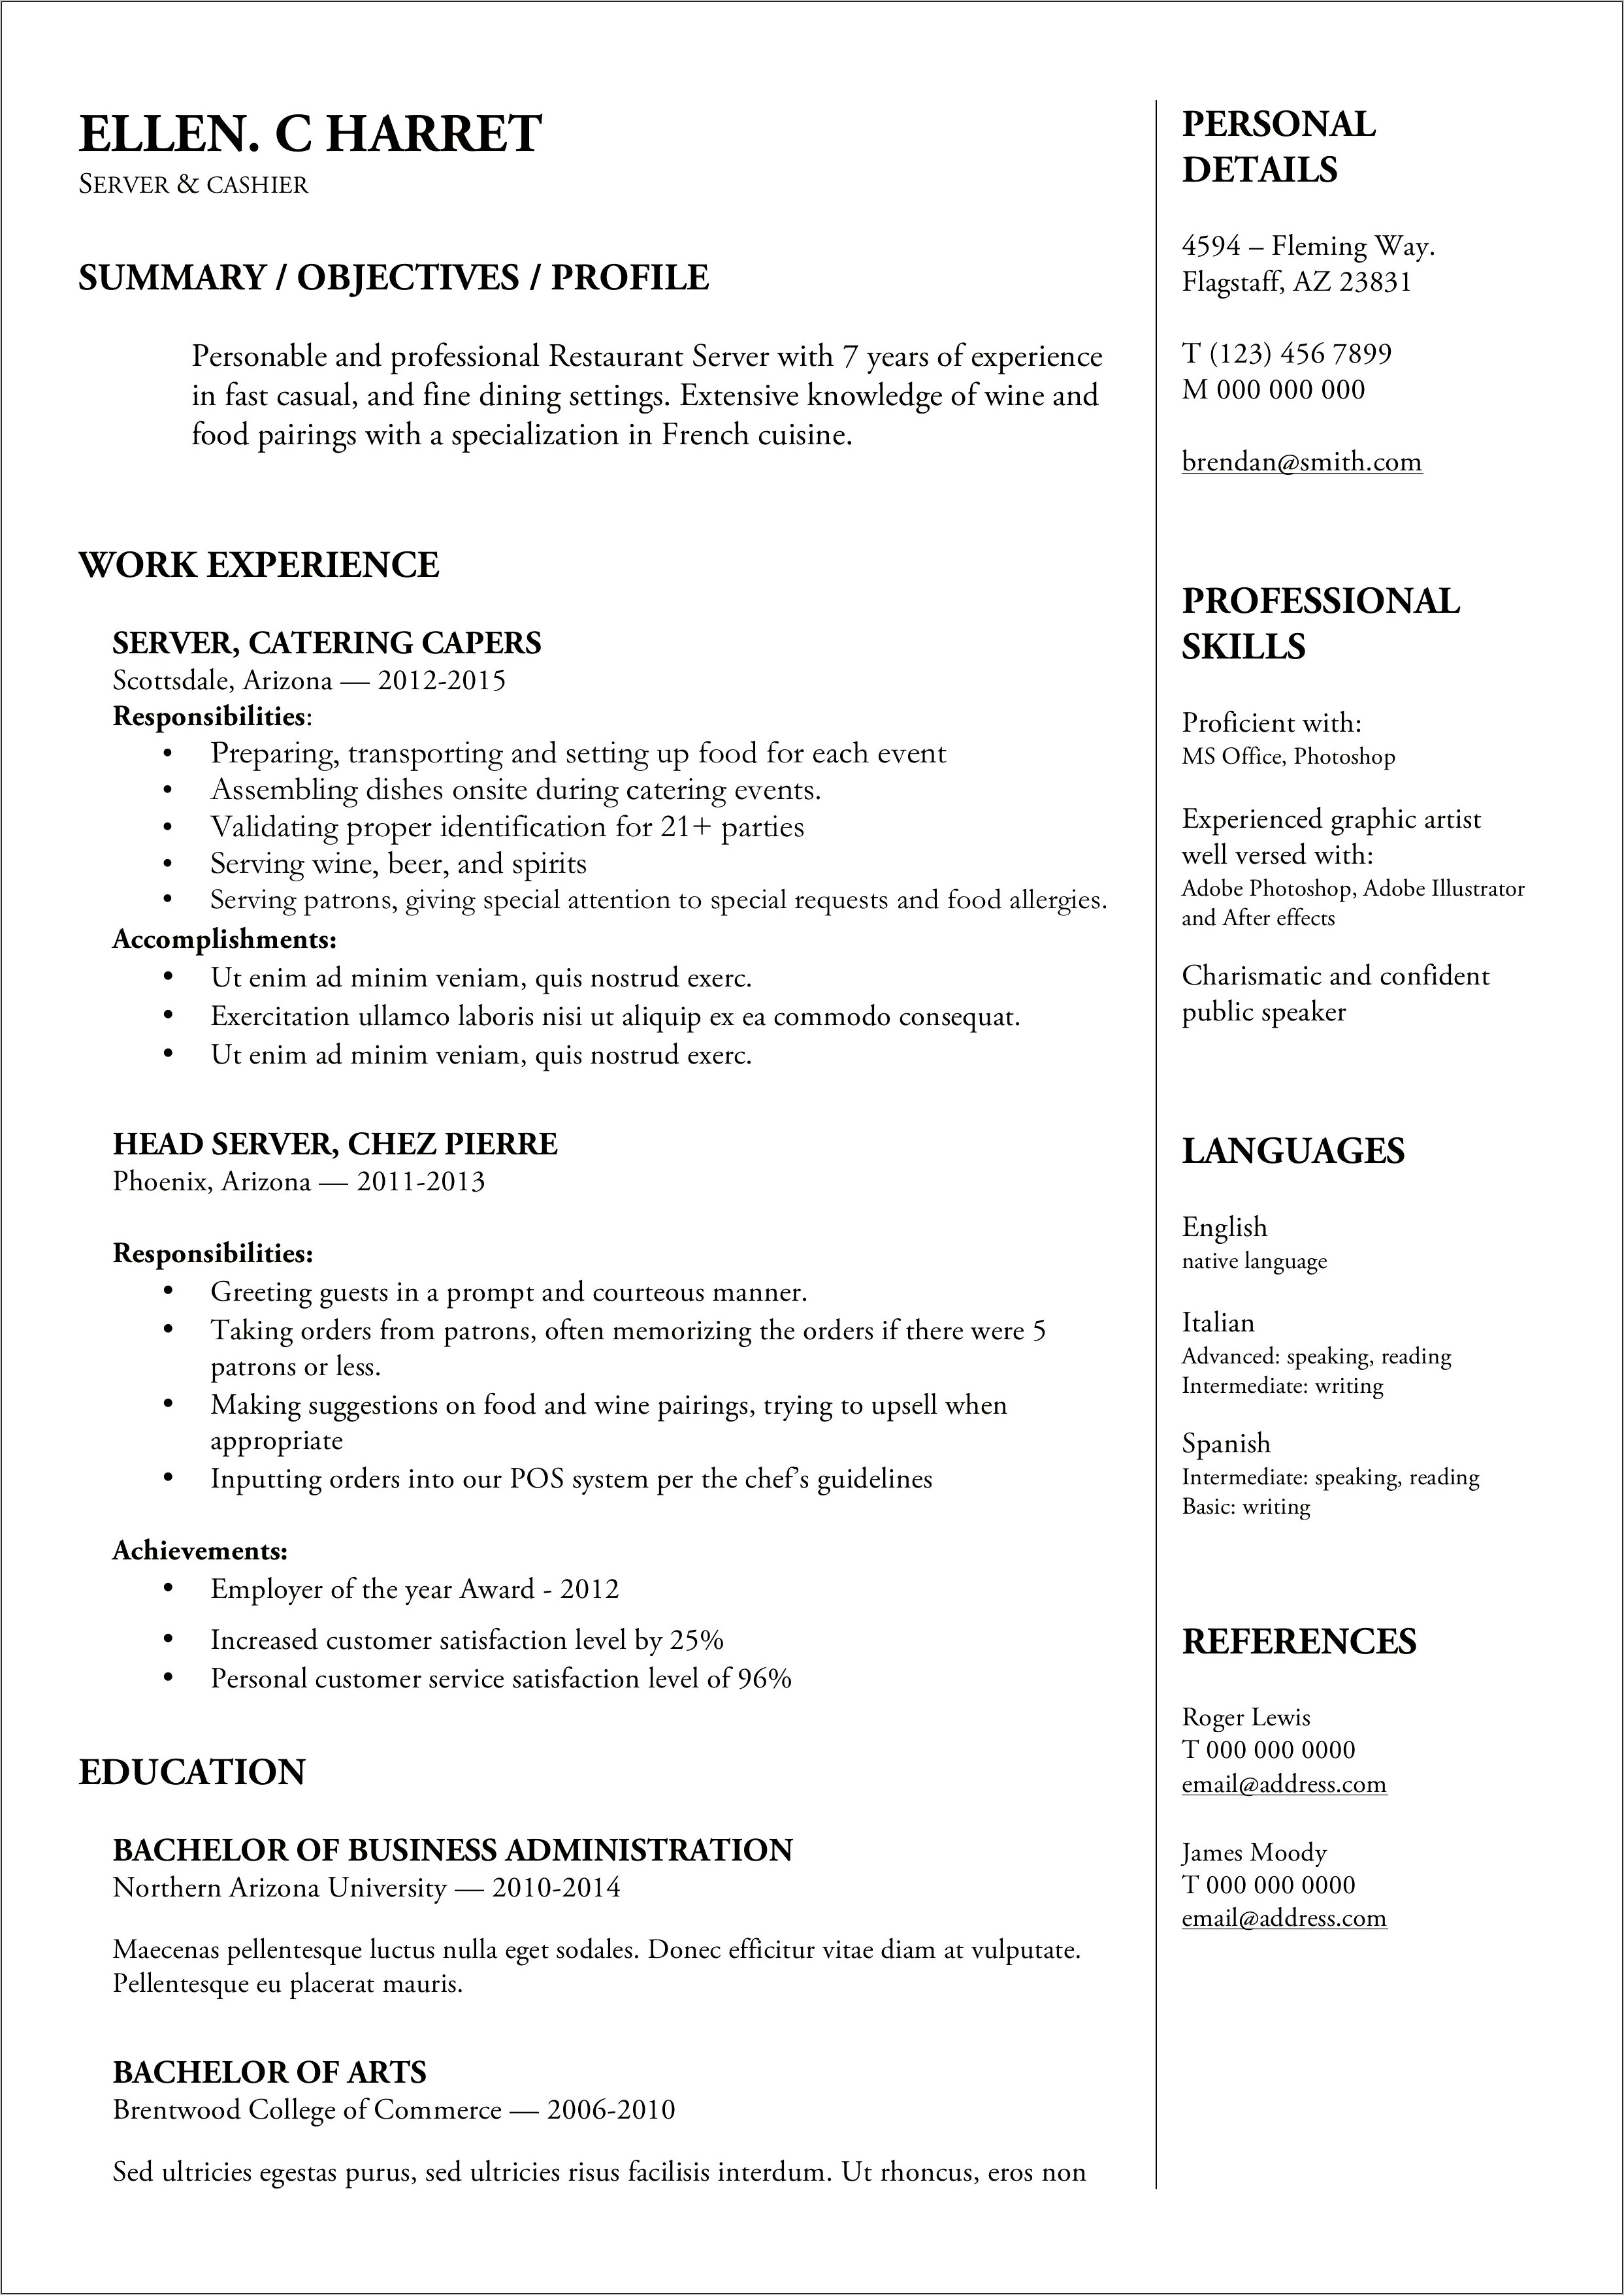 Resume Example For Applying To A Server Position